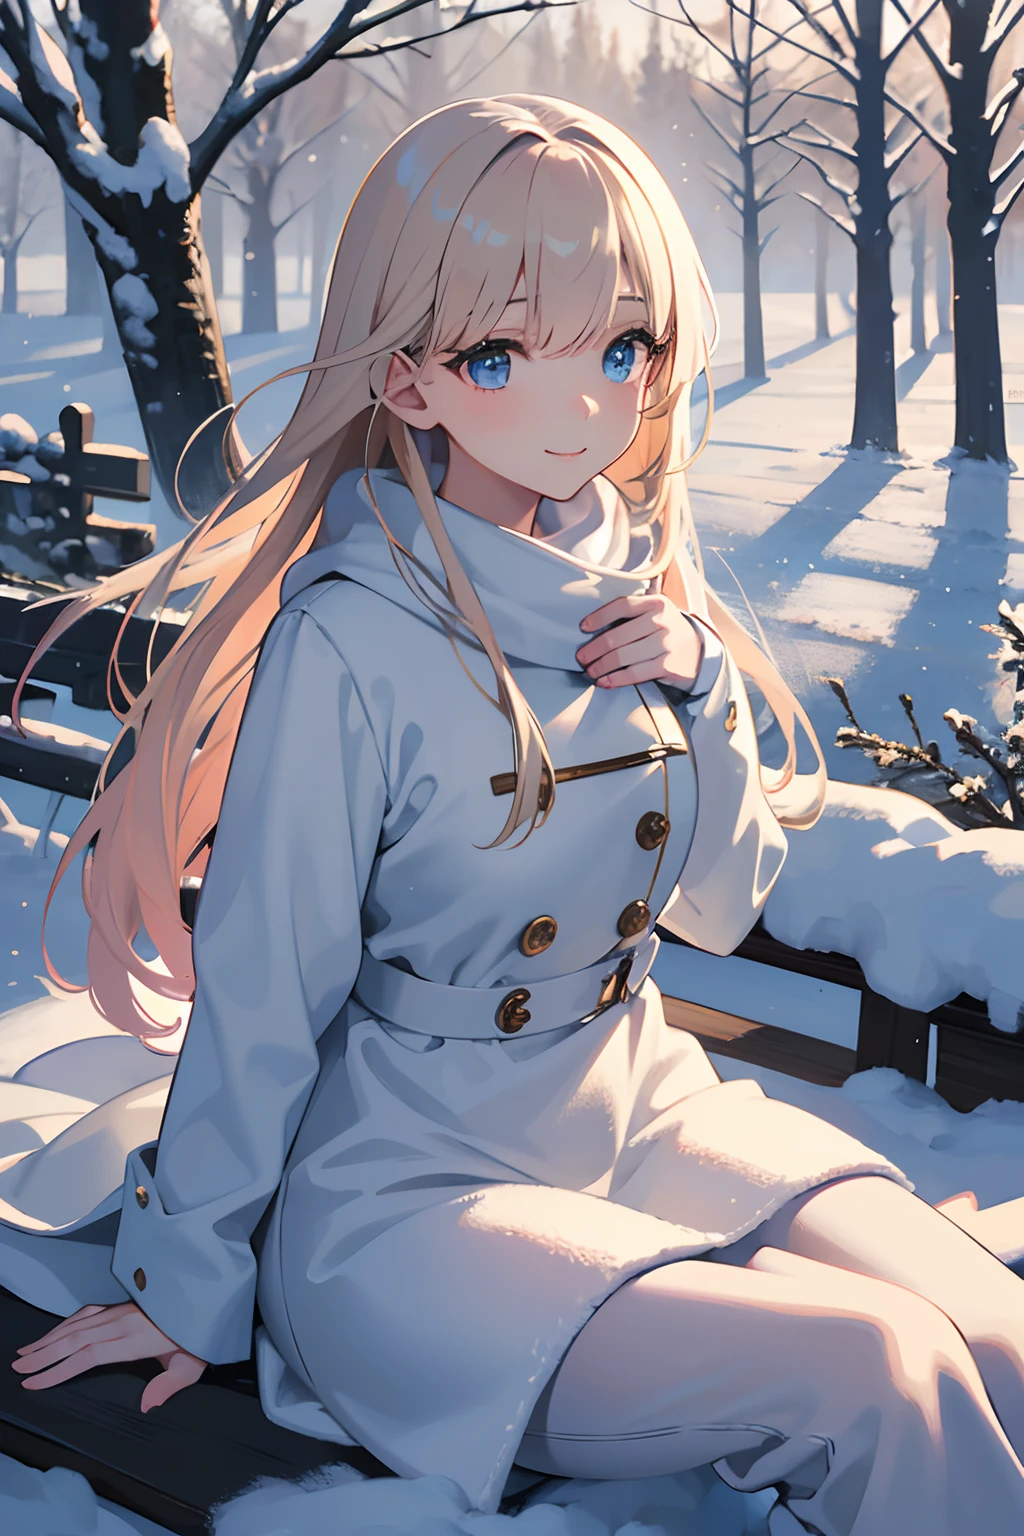 (best quality,highres),beautiful young woman,snow-covered countryside,winter scene,winter coat,long coat,beautiful winter boots,gloves,nudist,happy,natural beauty,long blonde hair,sparkling blue eyes,detailed facial features,rosy cheeks,warm smile,icy breath,pink and white winter landscape,snowflakes gently falling,crisp winter air,quiet and peaceful,serene atmosphere,tranquil mood,steps on sparkling snow,trail of footprints,white winter wonderland,pristine nature,soft and fluffy snow,clear blue sky,sunlight shining through the trees,subtle shadows,cozy and warm feeling,calm and relaxation,enjoying the solitude,one with nature,blissful harmony,soothing sounds of nature,gentle breeze,rustling of leaves in the wind,melting icicles,sound of crunching snow underfoot,whisper of the wind,feeling of  and liberation,the beauty of simplicity,uninhibited and carefree existence,embrace of natural elements,graceful and elegant movement,peaceful aura,feeling of contentment and happiness,enjoying the present moment,connecting with the environment,gentle and slow pace,taking in the breathtaking scenery,admiring the winter wonderland,immersed in the beauty of nature,unforgettable winter memories.
【Material】：oil painting,classic artwork,lifelike portrait,realistic style,soft brushstrokes,rich textures,attention to detail,vibrant colors,warm color palette,depth and dimension,subtle highlights and shadows,touch of impressionism,elegant and sophisticated composition,fine art quality
【image quality】：ultra-detailed,high resolution,crystal clear image,sharp focus,fine details,captivating clarity and definition,professional grade,exquisite quality,picture-perfect,impeccable craftsmanship,superb level of detail,realistic portrayal
【art-style】：portrait art,realism,impressionism,romanticism,winter landscape painting,contemporary art,landscape photography,concept artists
【Color tones】：soft and cool tones,winter color palette,frosty blues,pure whites,subtle greys,hints of pink,pops of vibrant red
【lamplight】：soft diffused light,subtle sunlight,play of light and shadow,gentle glow,warm and cozy ambiance,calming and inviting